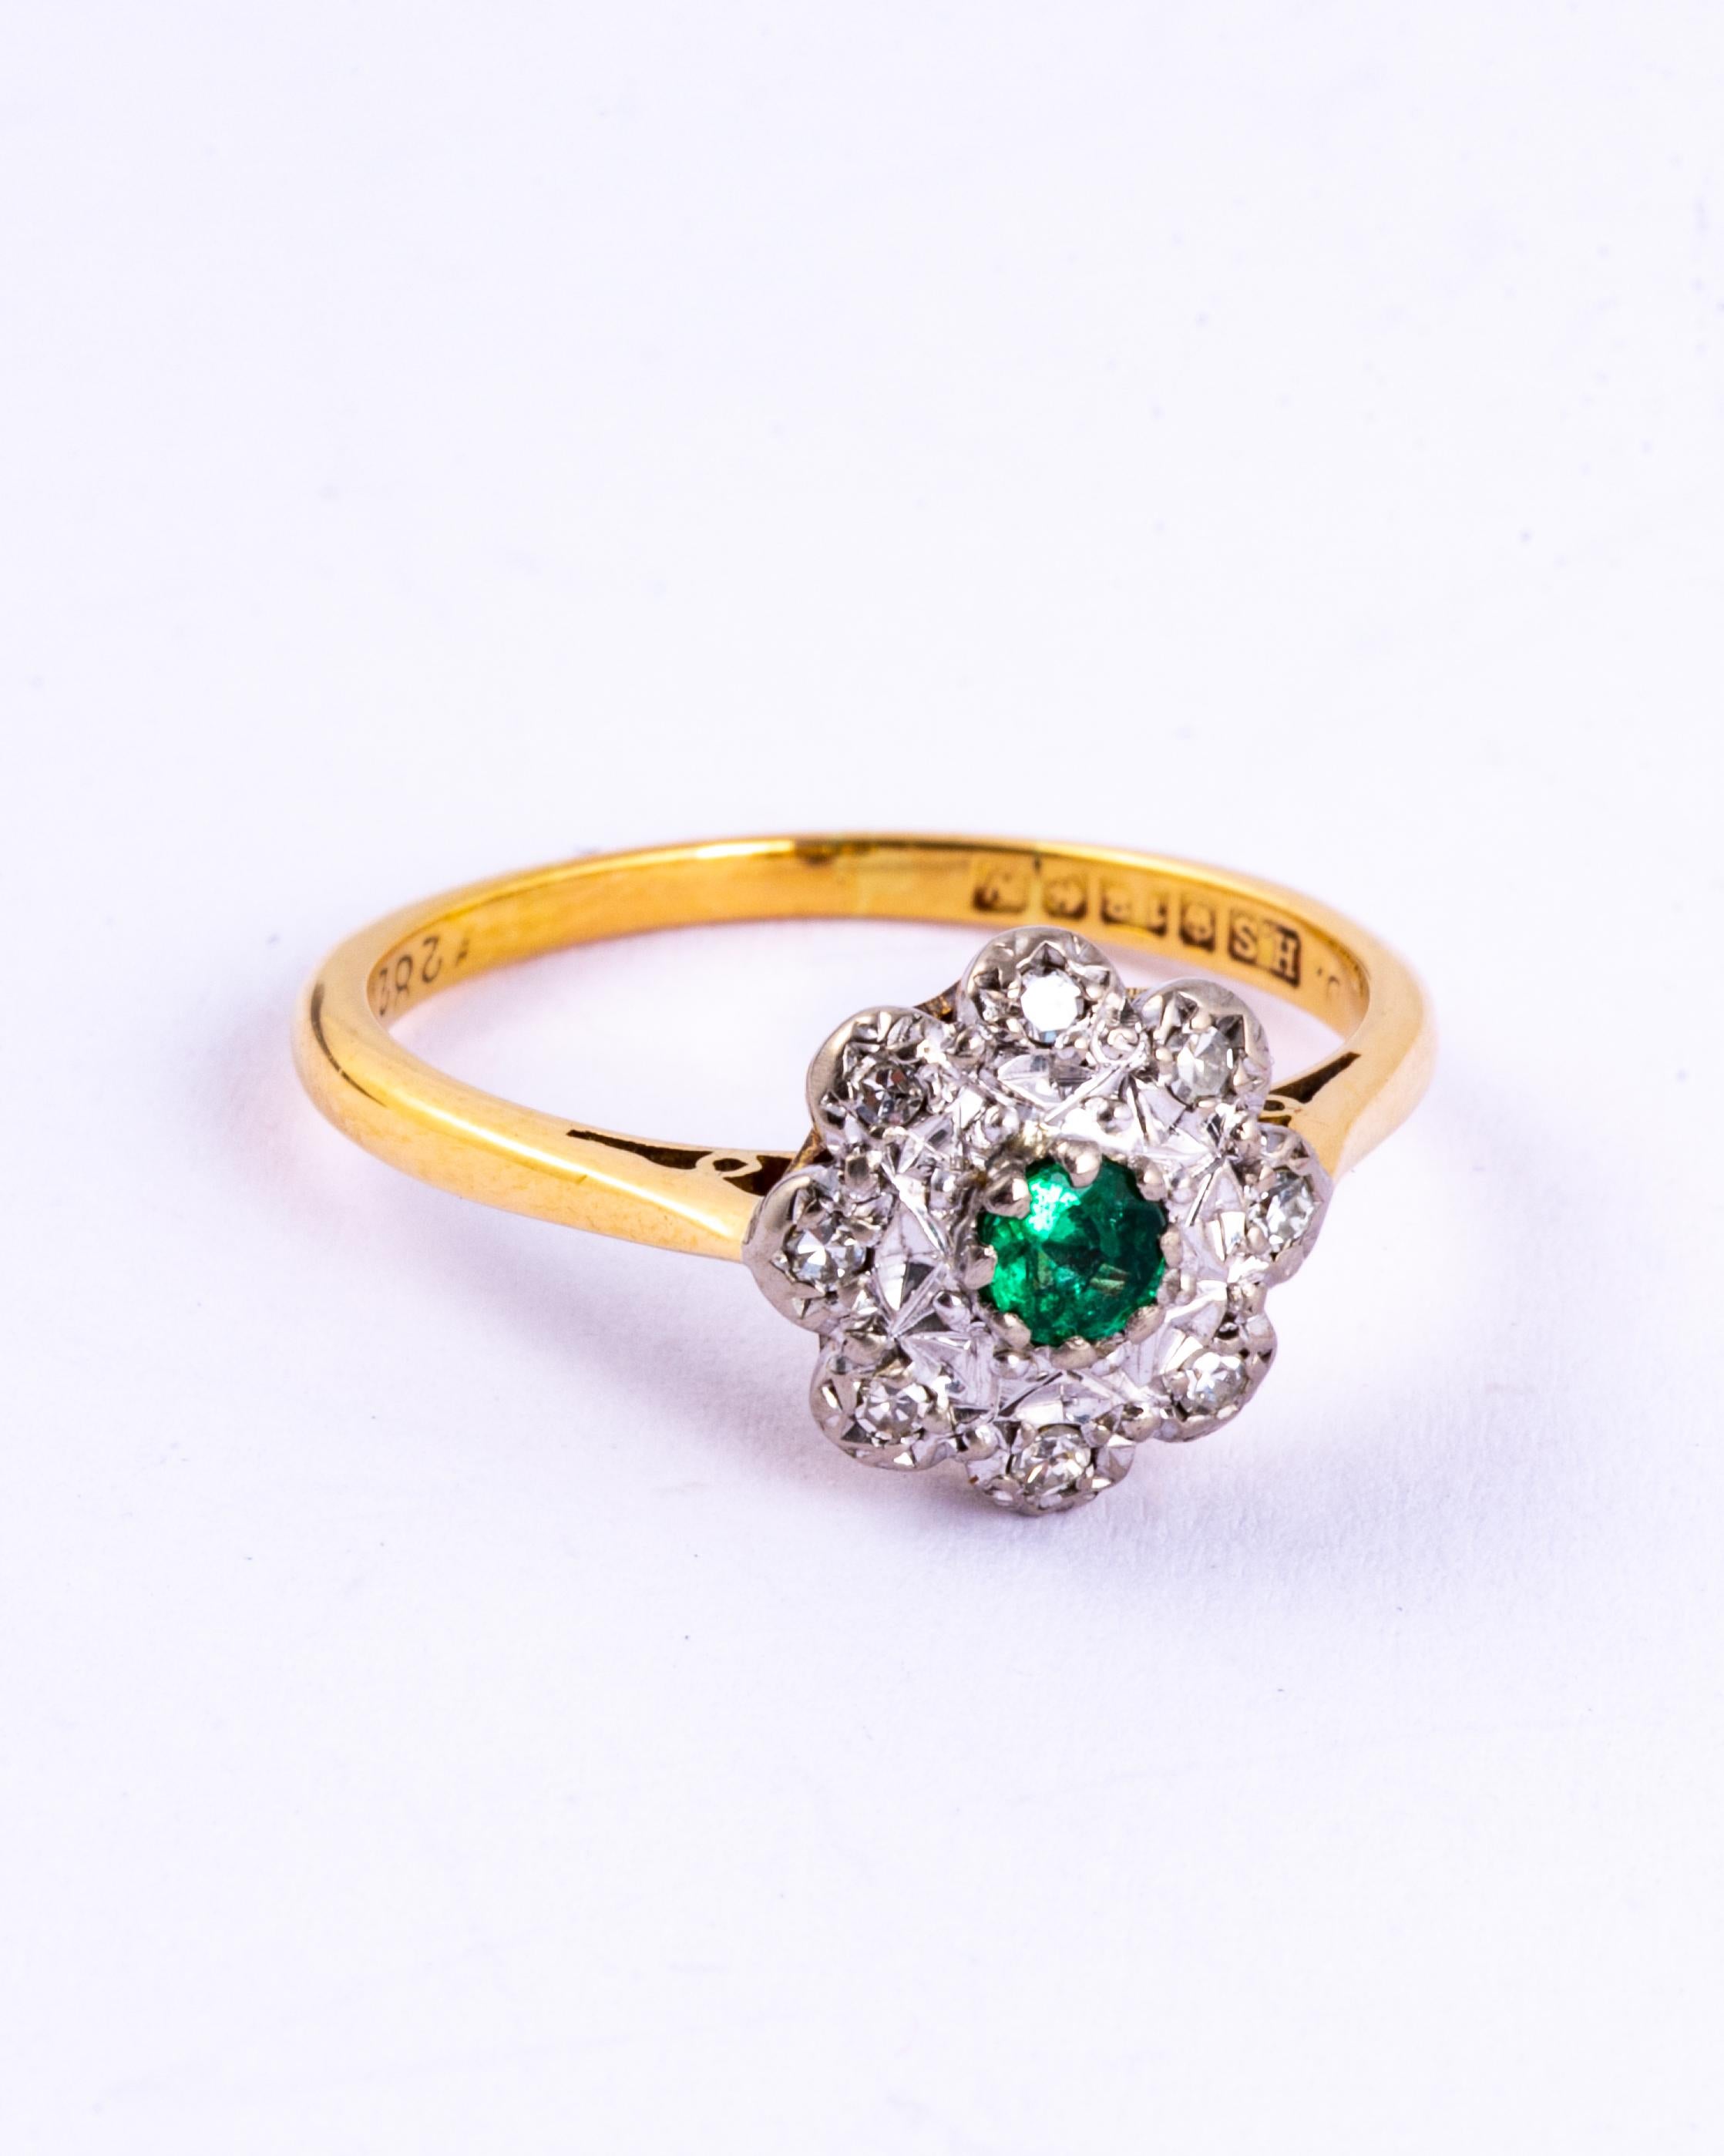 The wonderful bright emerald at the centre of this cluster measures approximately 20pts and is surrounded by a glittering halo of diamonds each measuring 3pts each. The stones are set in platinum and the rest of the ring is modelled in 18ct gold.